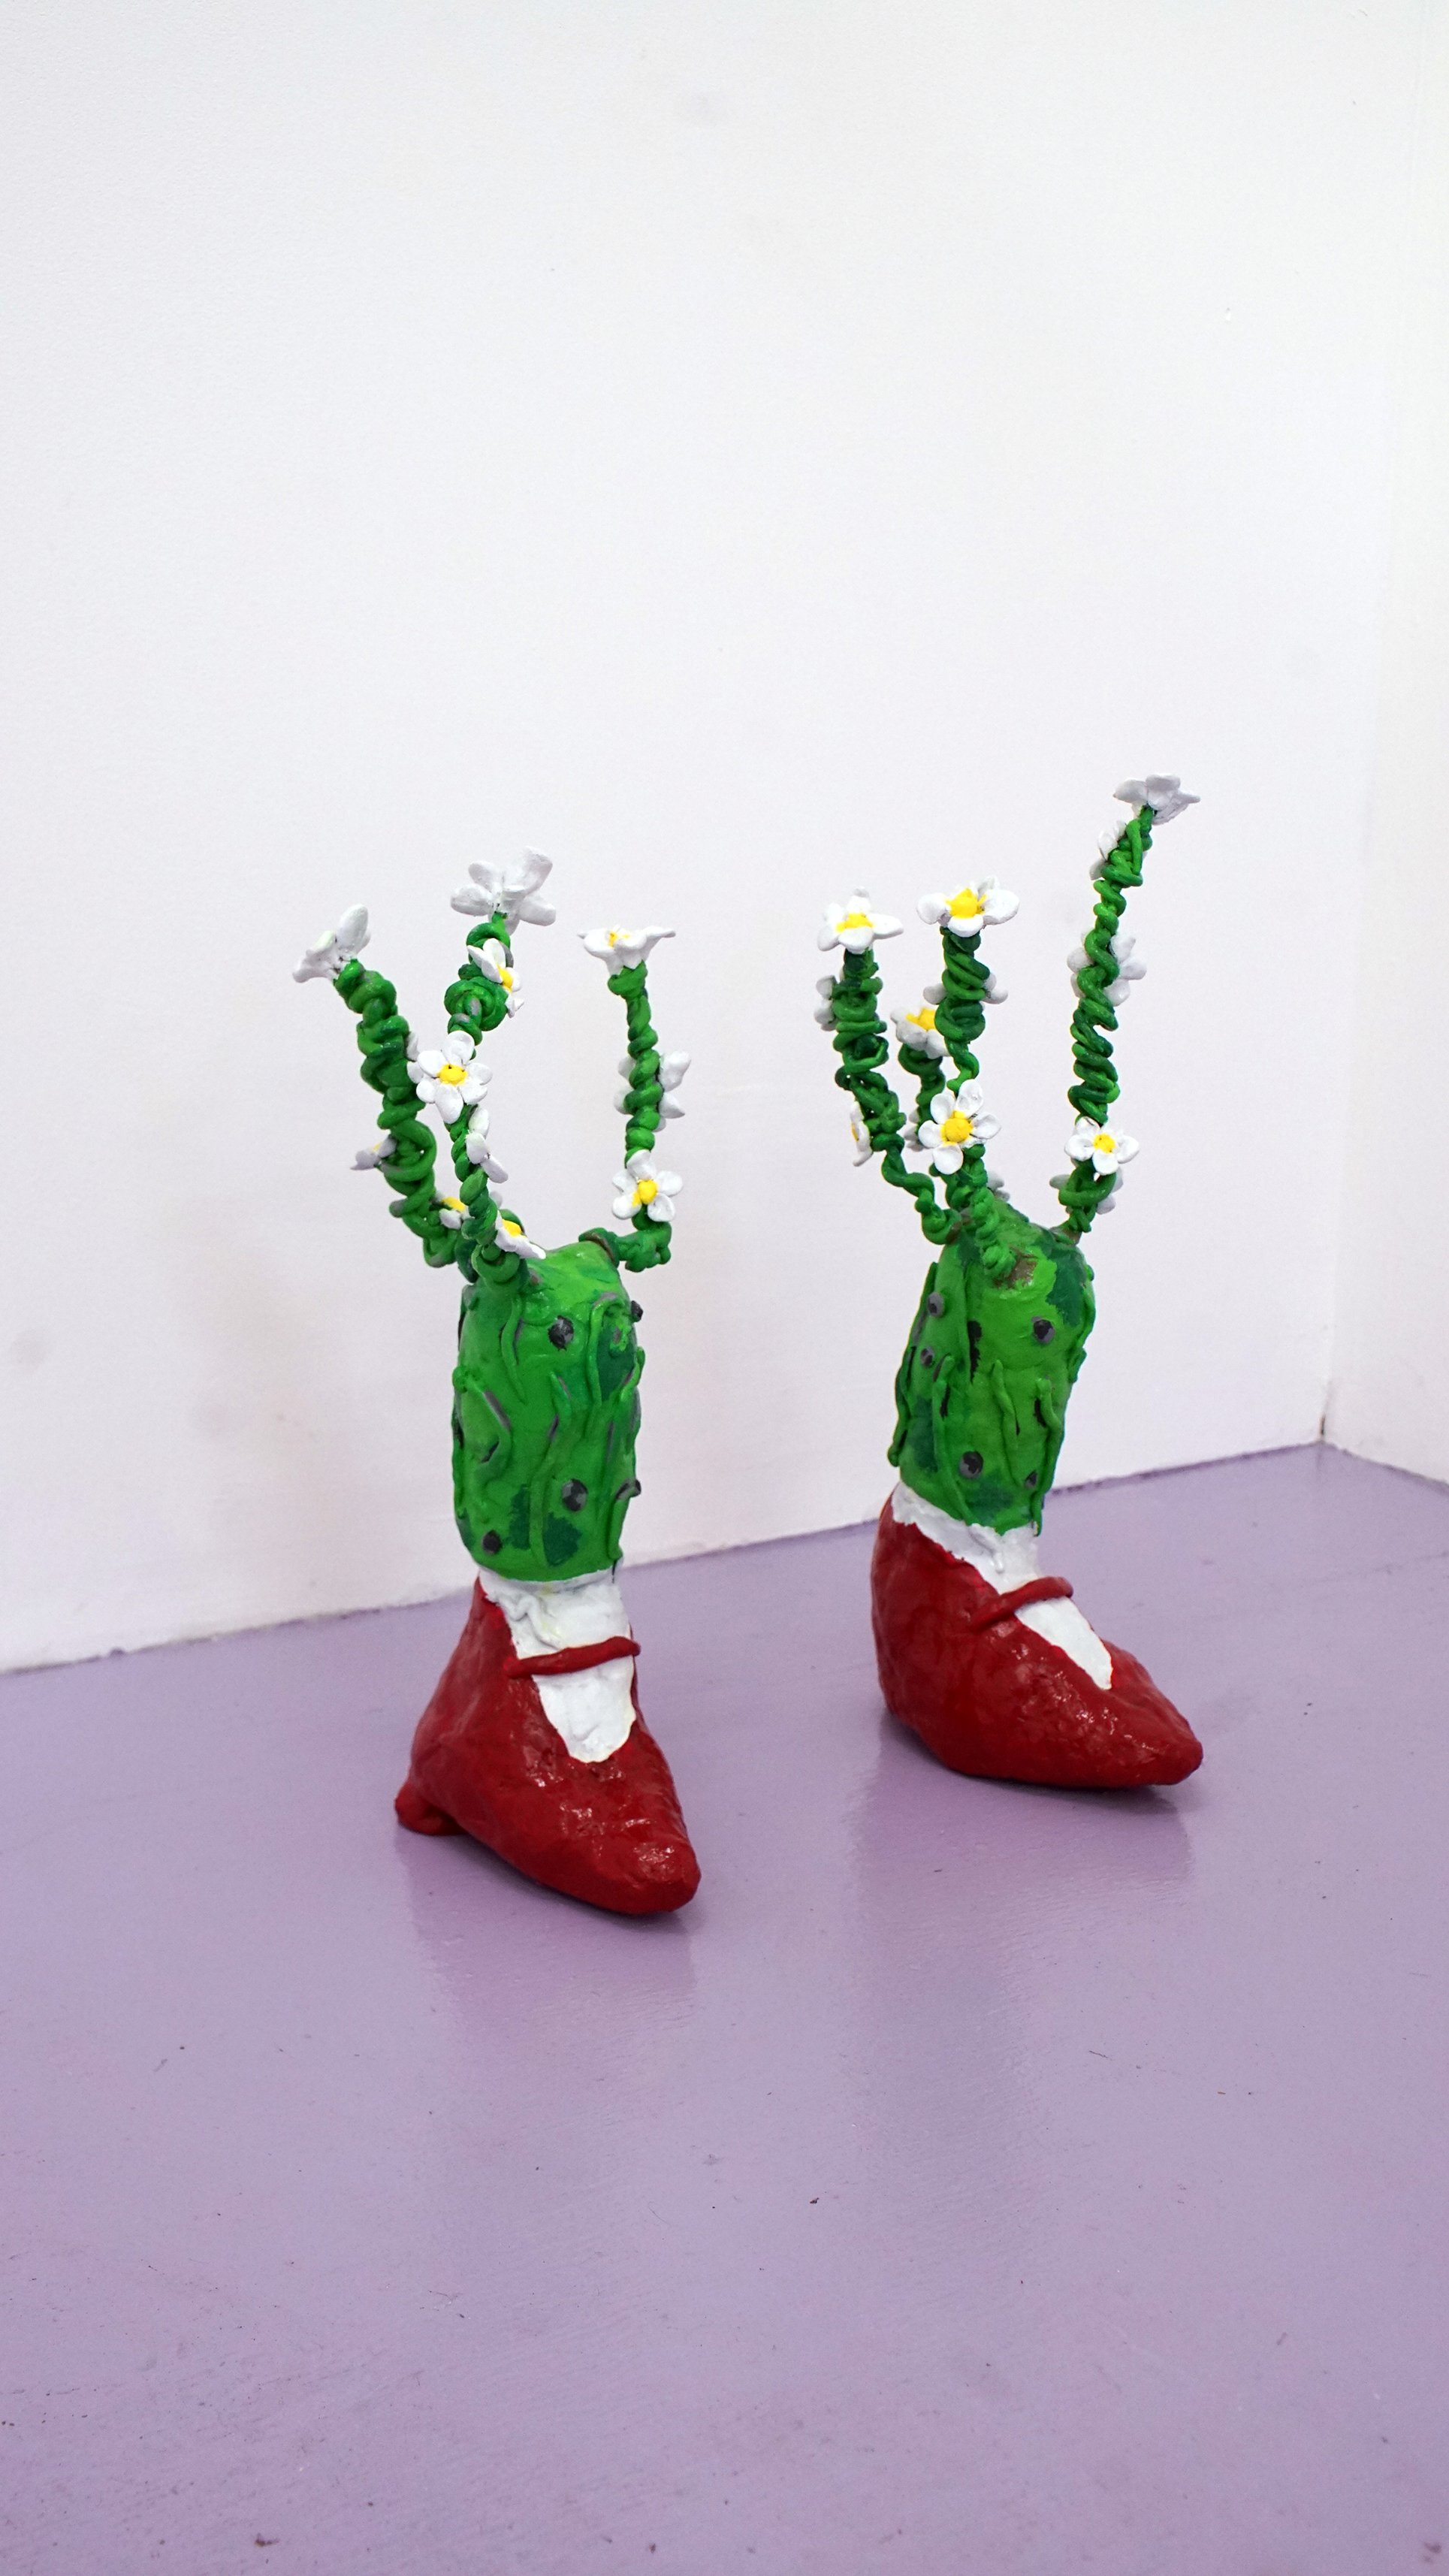  Flower Feet, 2017  Epoxy sculpt, acrylic, 18 x 14 inches  Installation image from: “Daisy Chain Heart Ecology,” 2017 